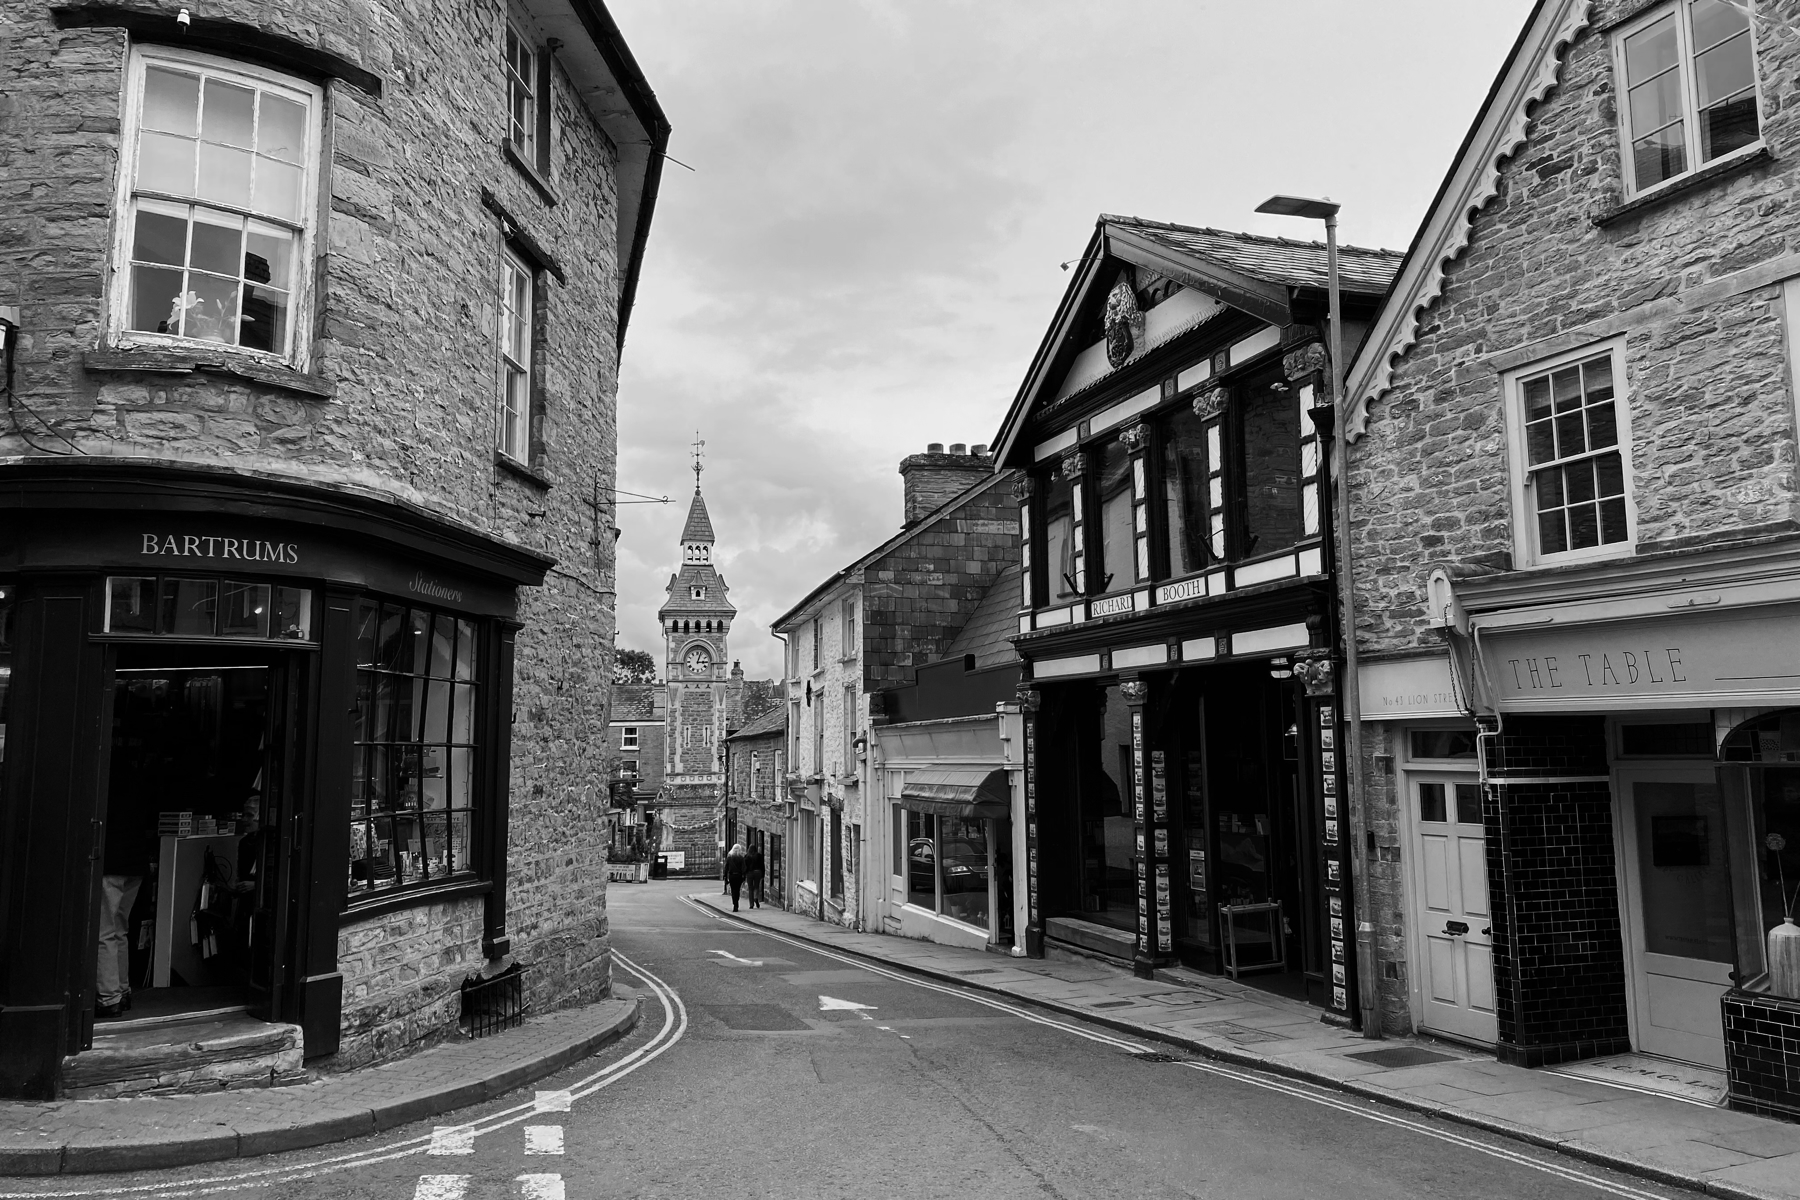 Monochrome view of town street with an ornate bookshop and clock tower in the background.